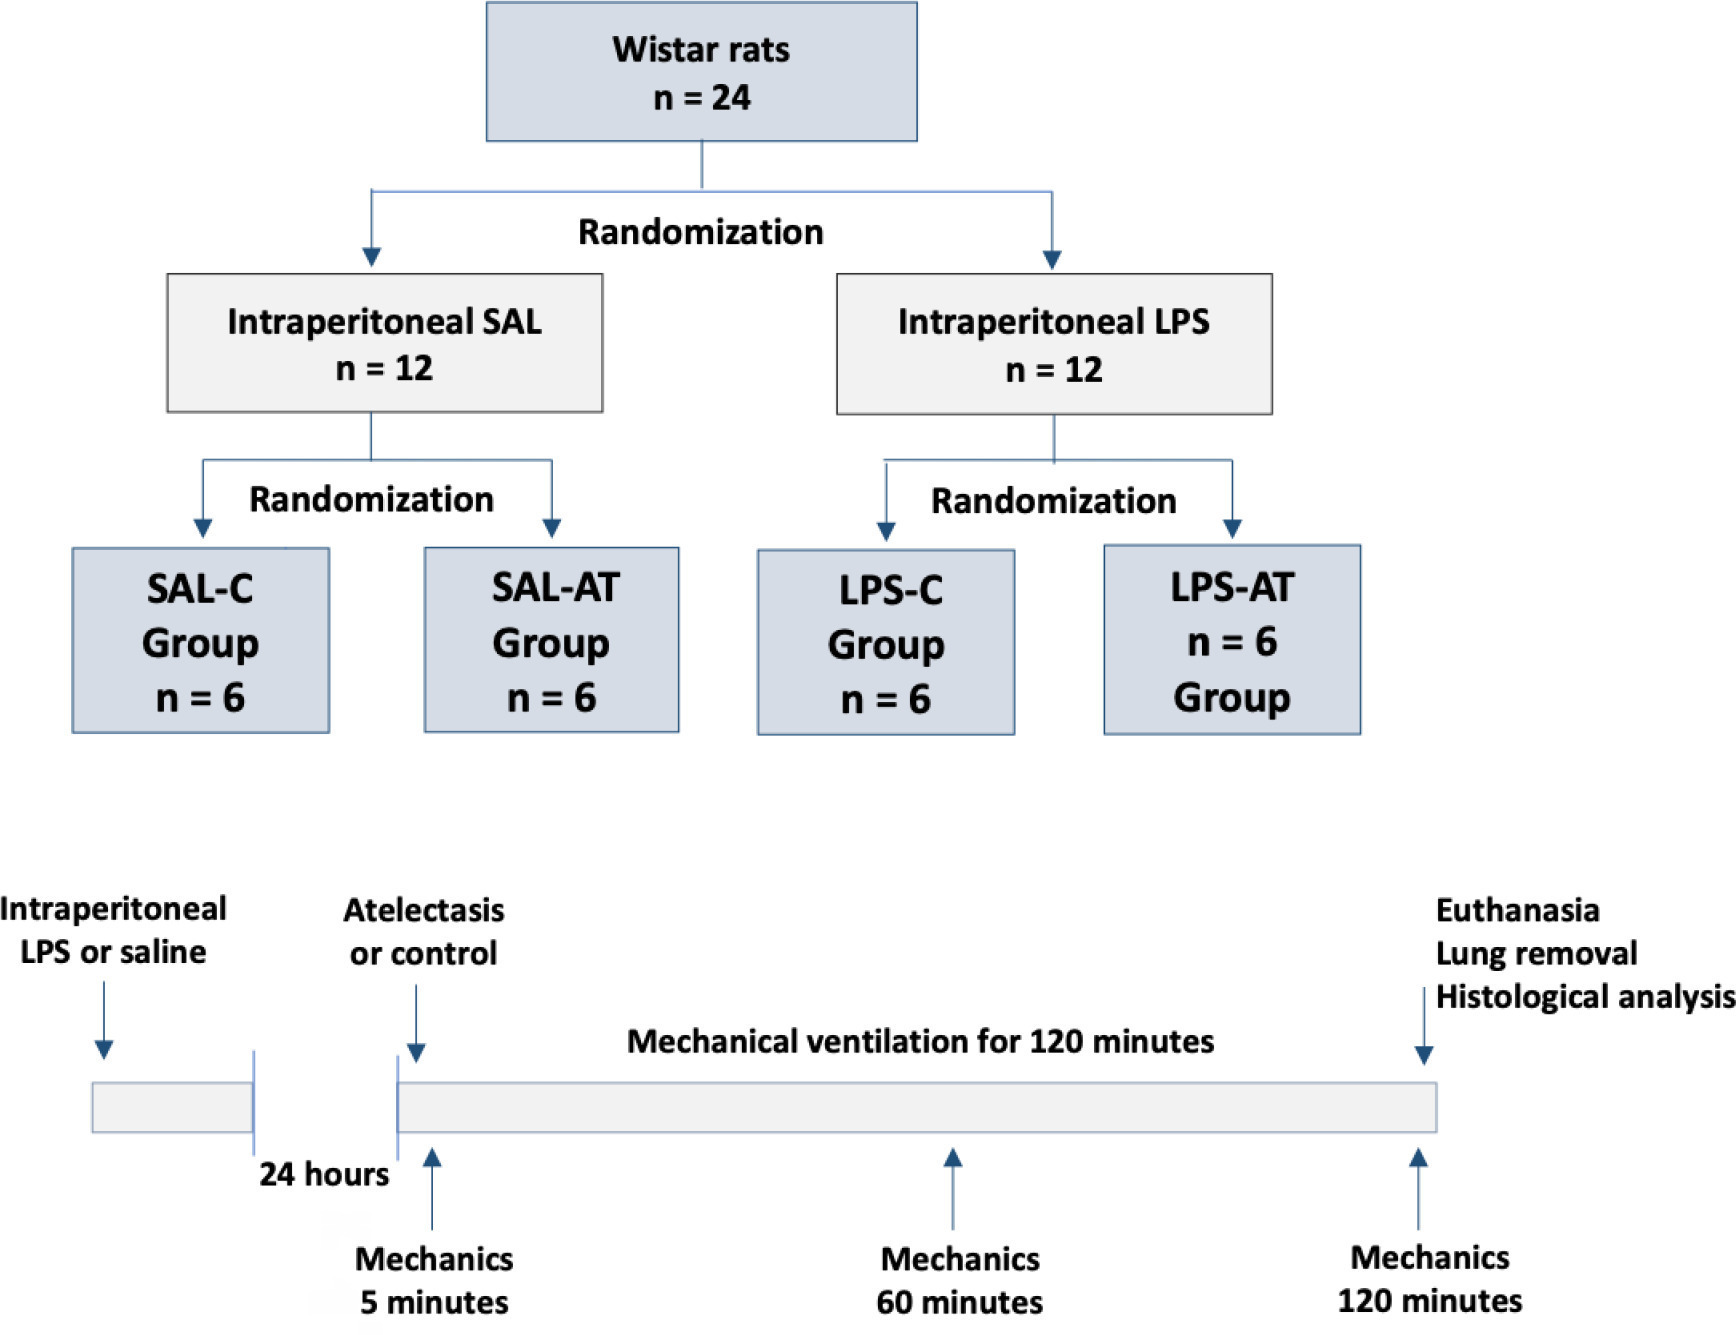 Effects of atelectatic areas on the surrounding lung tissue during
					mechanical ventilation in an experimental model of acute lung injury induced by
					lipopolysaccharide